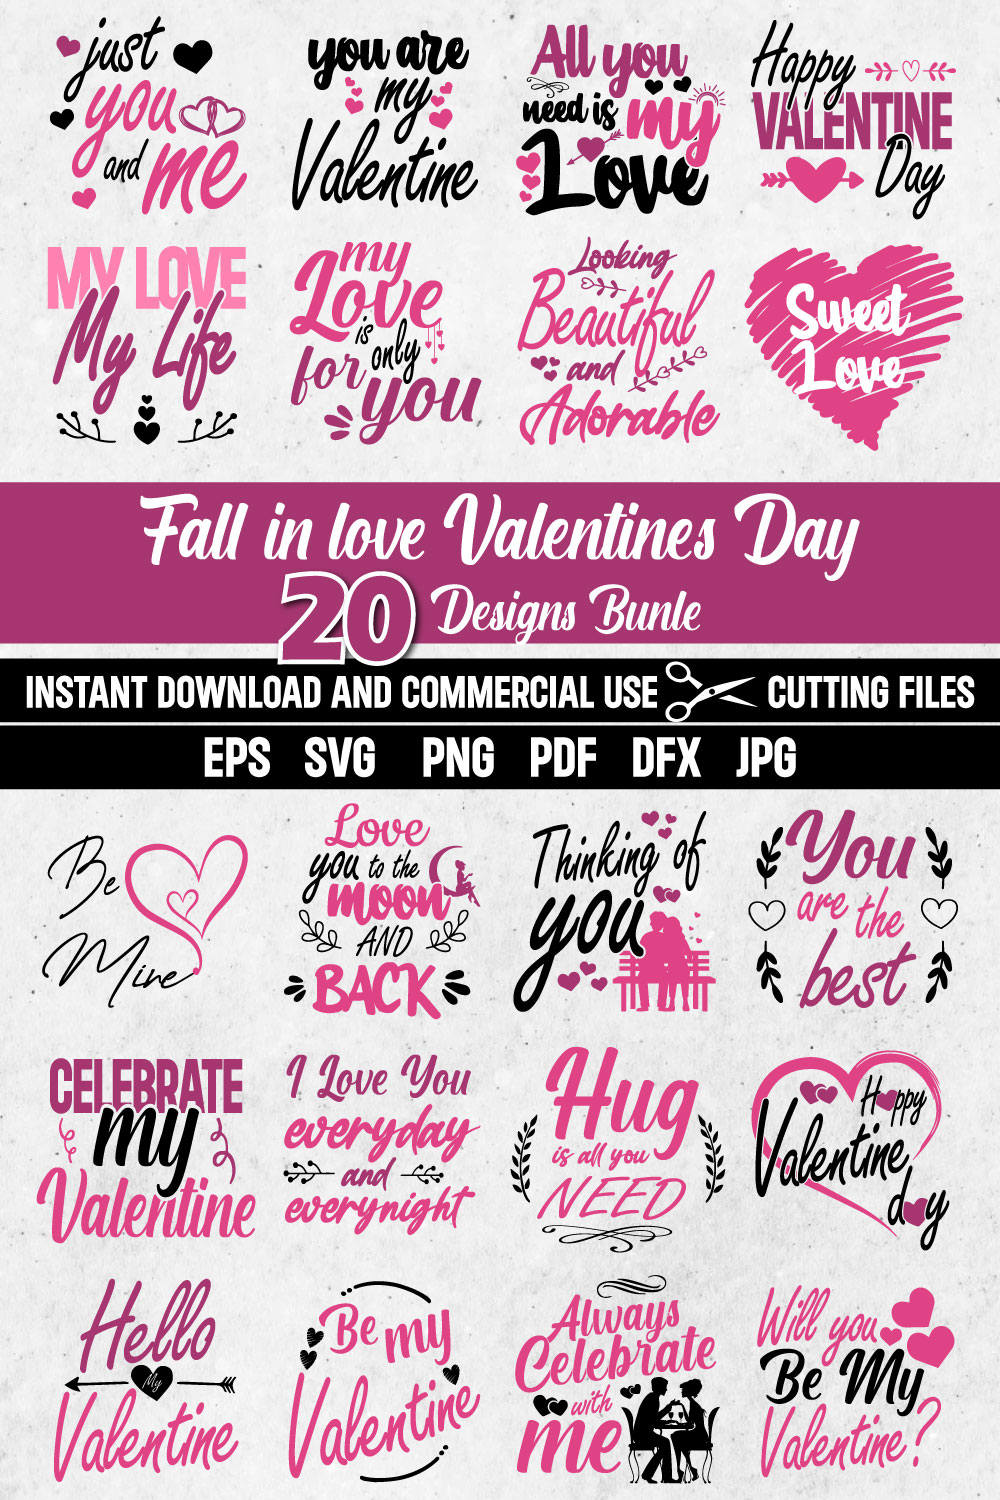 Valentine's Day Fall in Love Colorful Bundle Designs pinterest image.